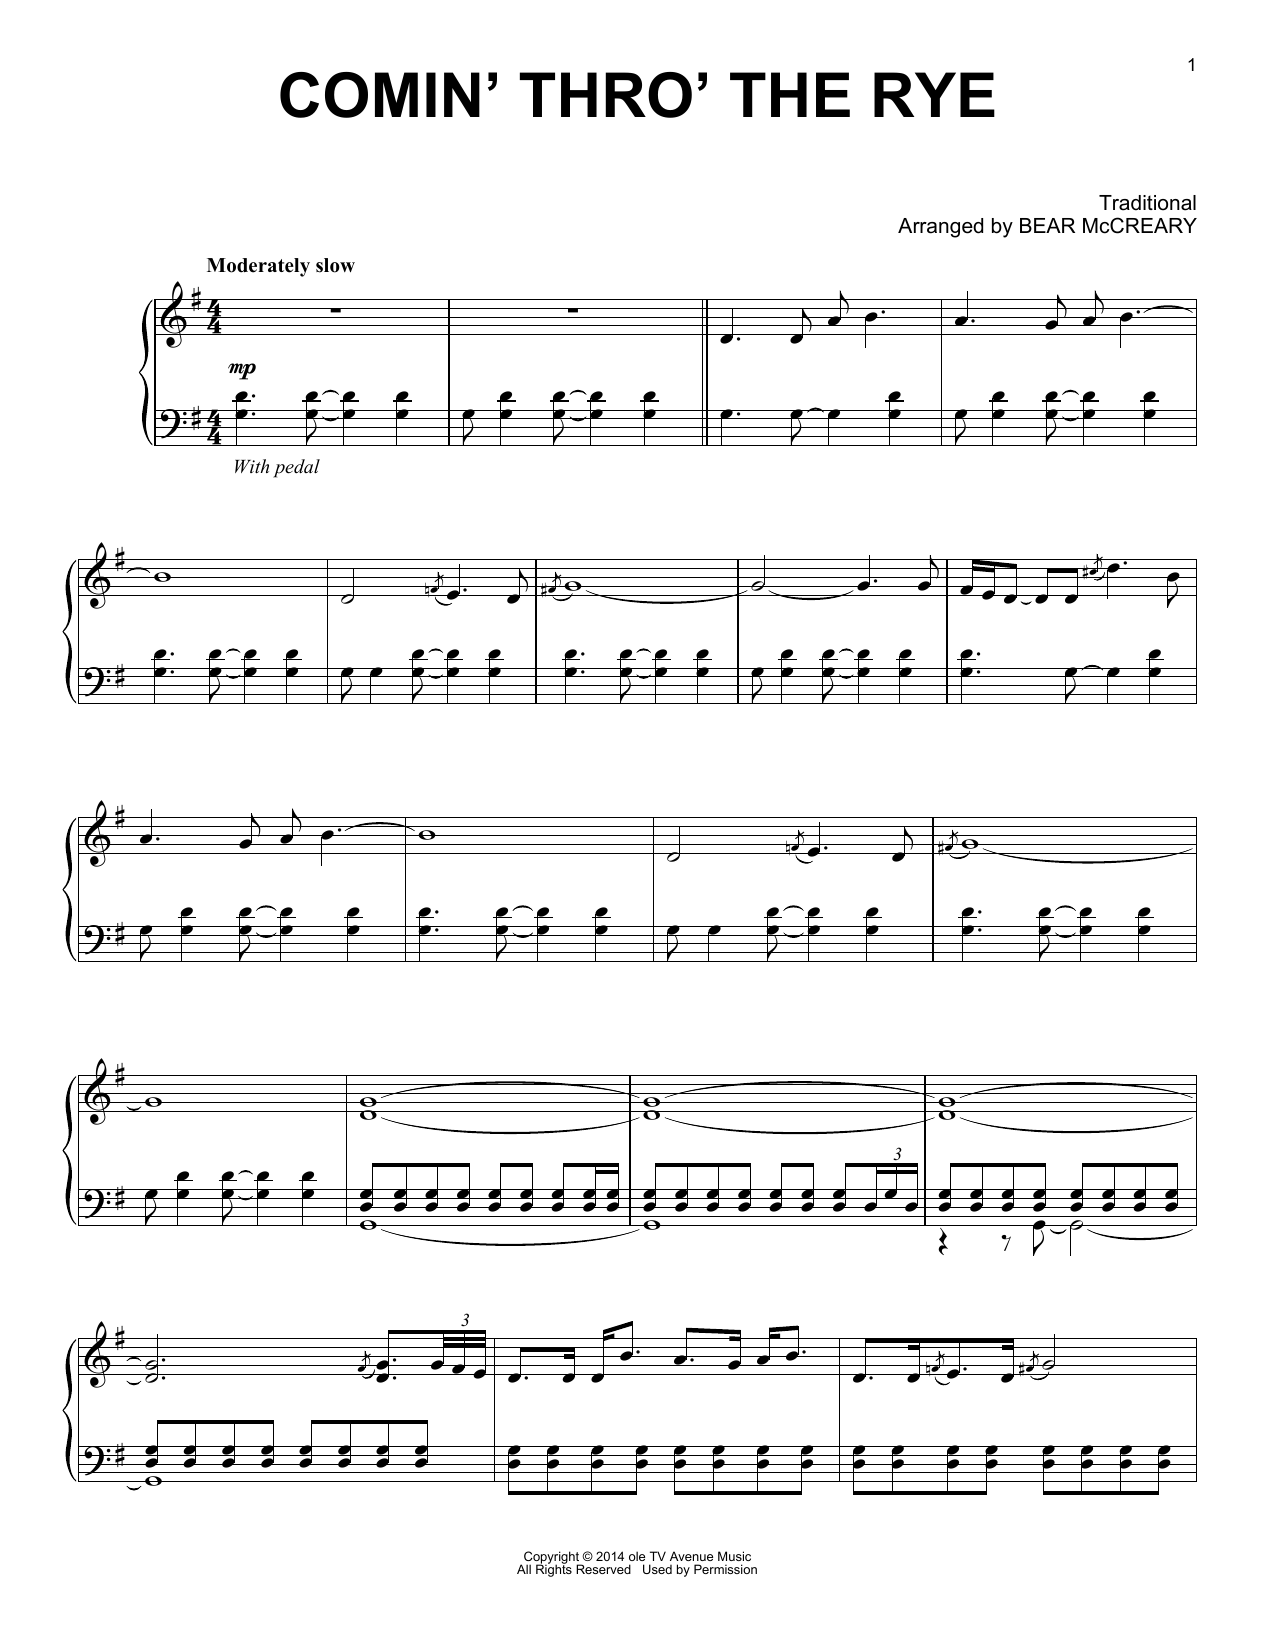 Bear McCreary Thro' Rye (from Outlander)" Sheet Music PDF Notes, | Film/TV Piano Solo Download Printable. SKU: 418725